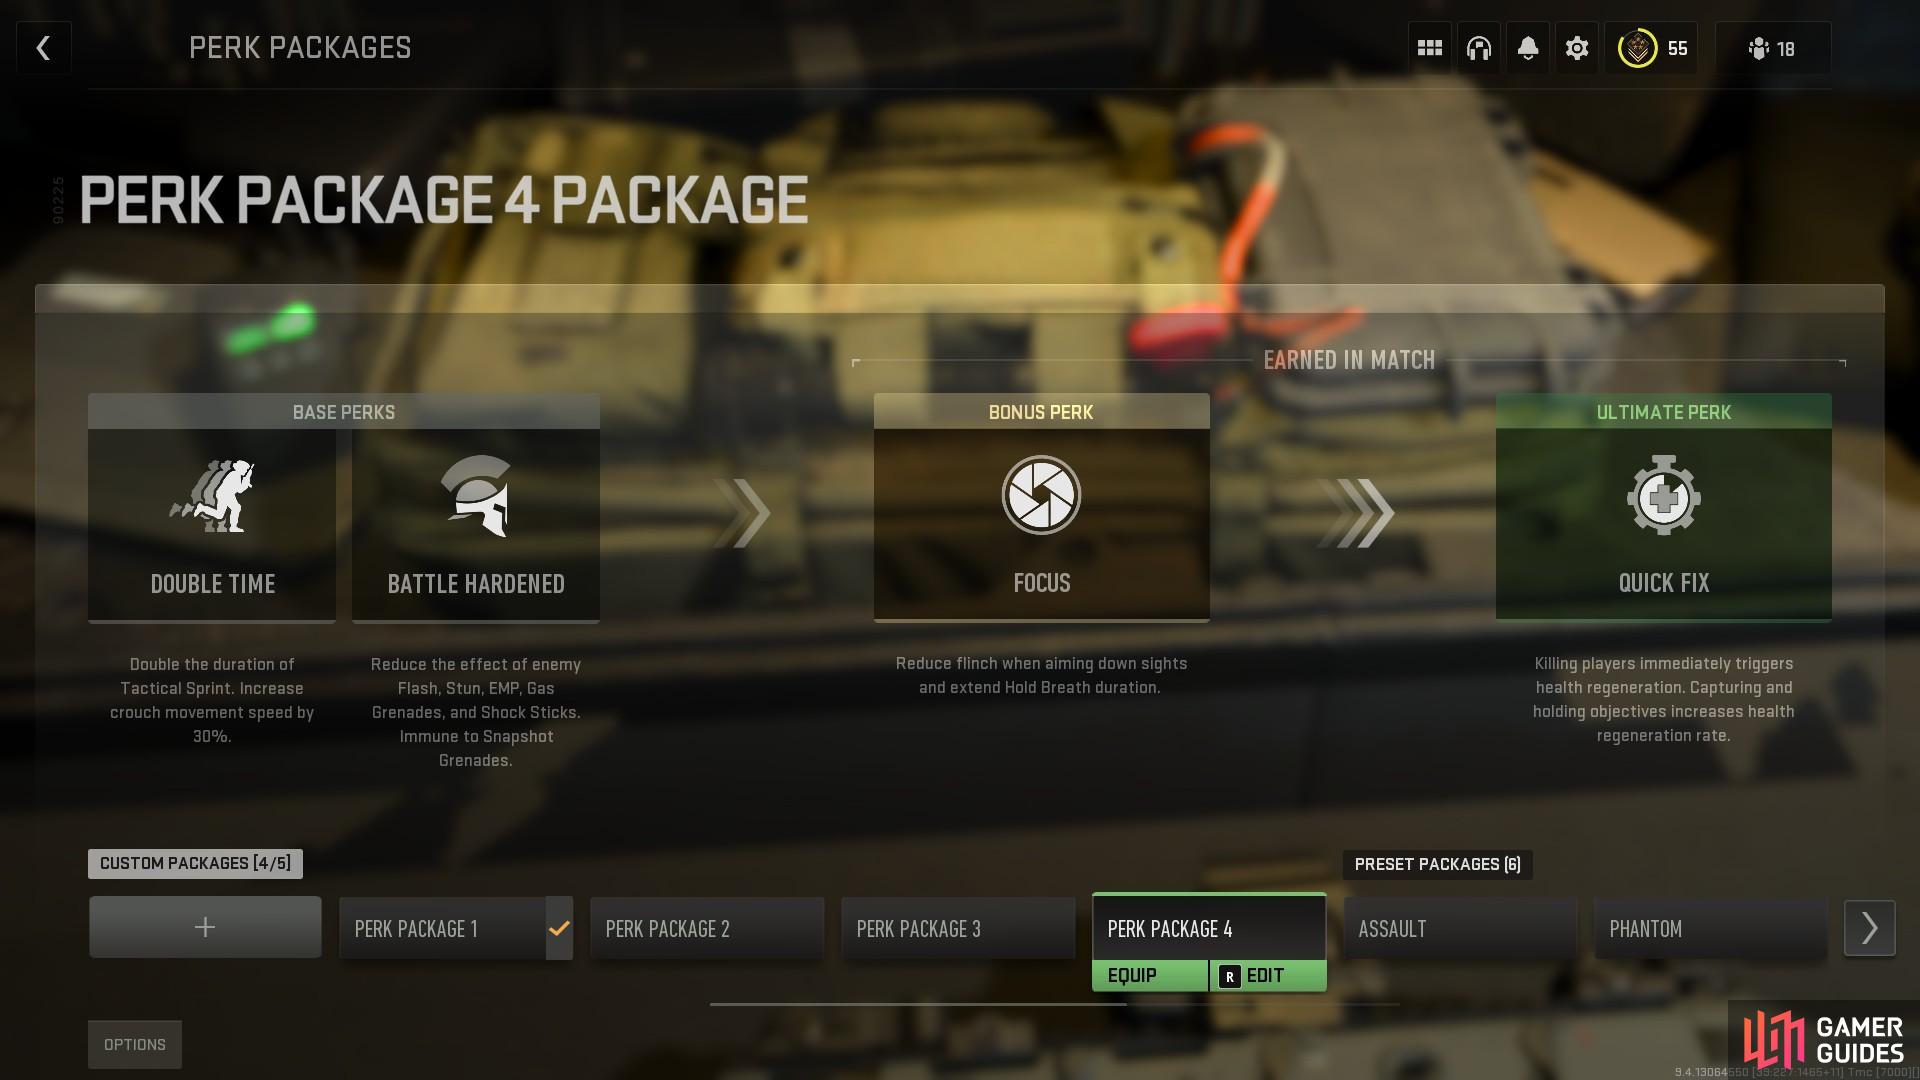 Here is a closer look at the best Perk Packages in MW2.